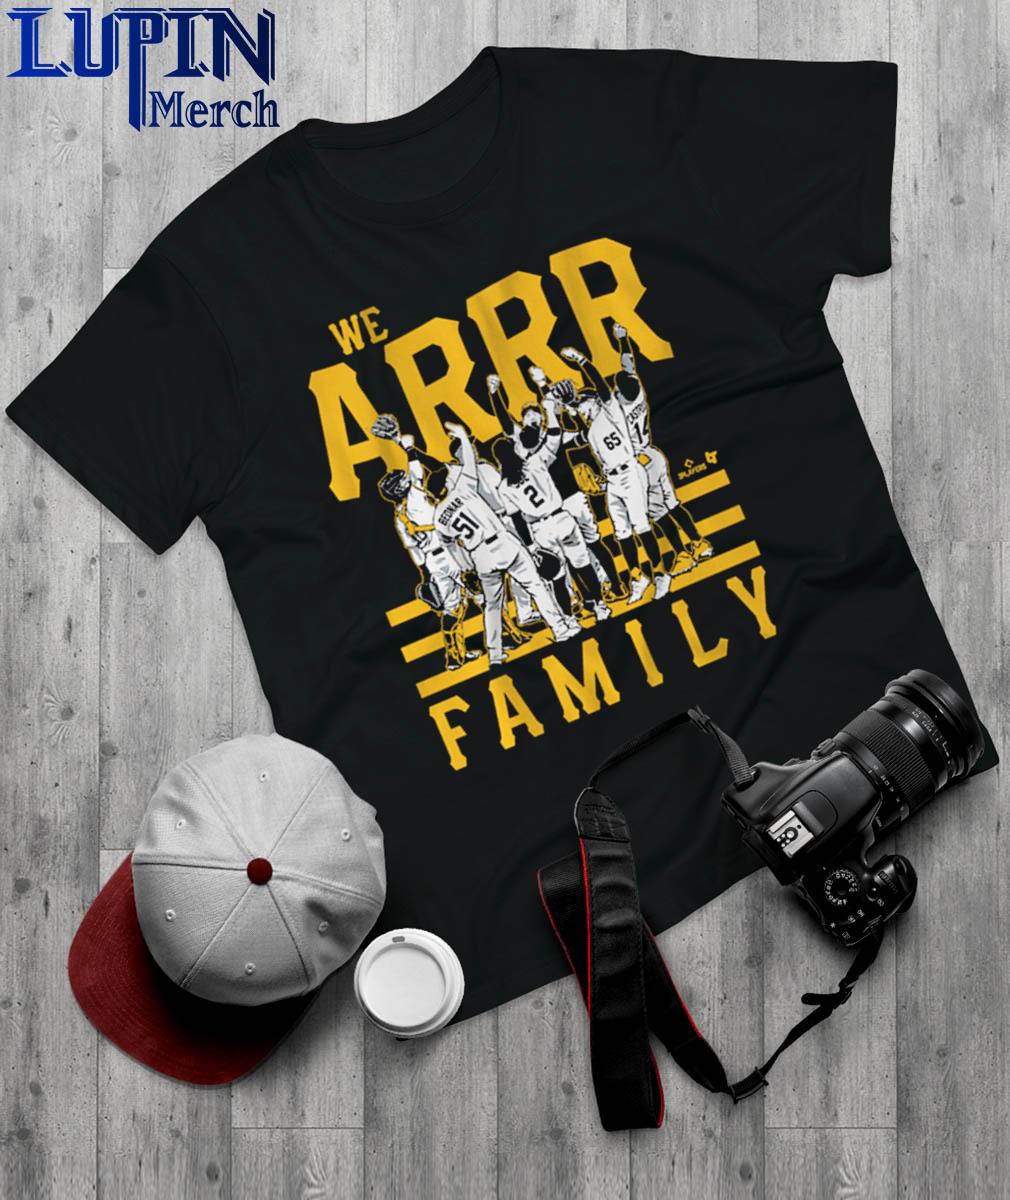 Pittsburgh Pirates we arrr Family 2023 shirt, hoodie, sweater, long sleeve  and tank top